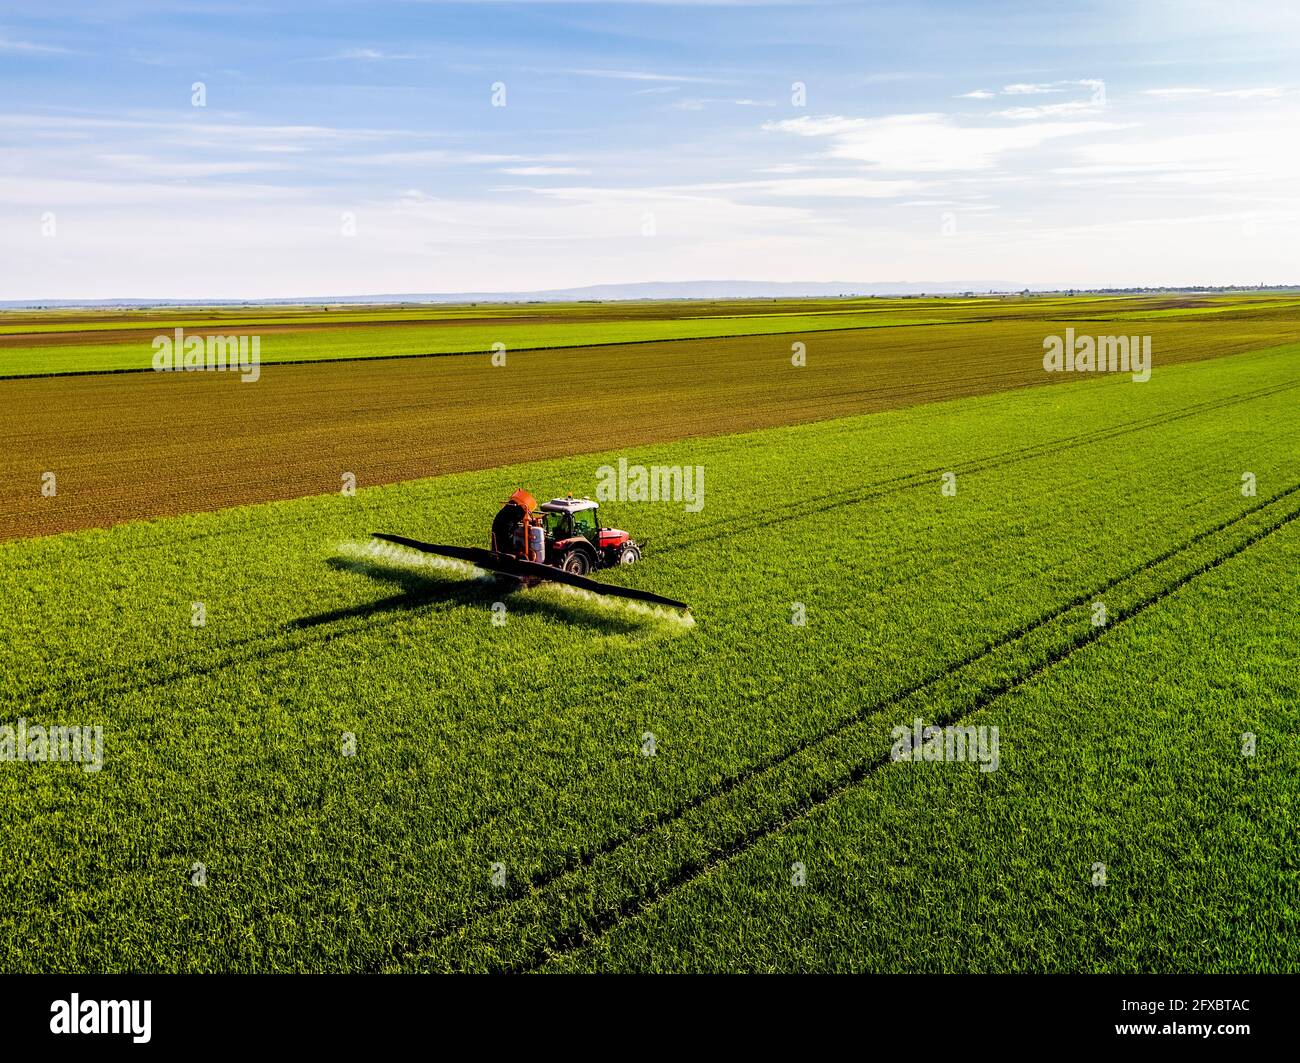 Crop sprayer sprinkling fungicide on wheat field during sunny day Stock Photo